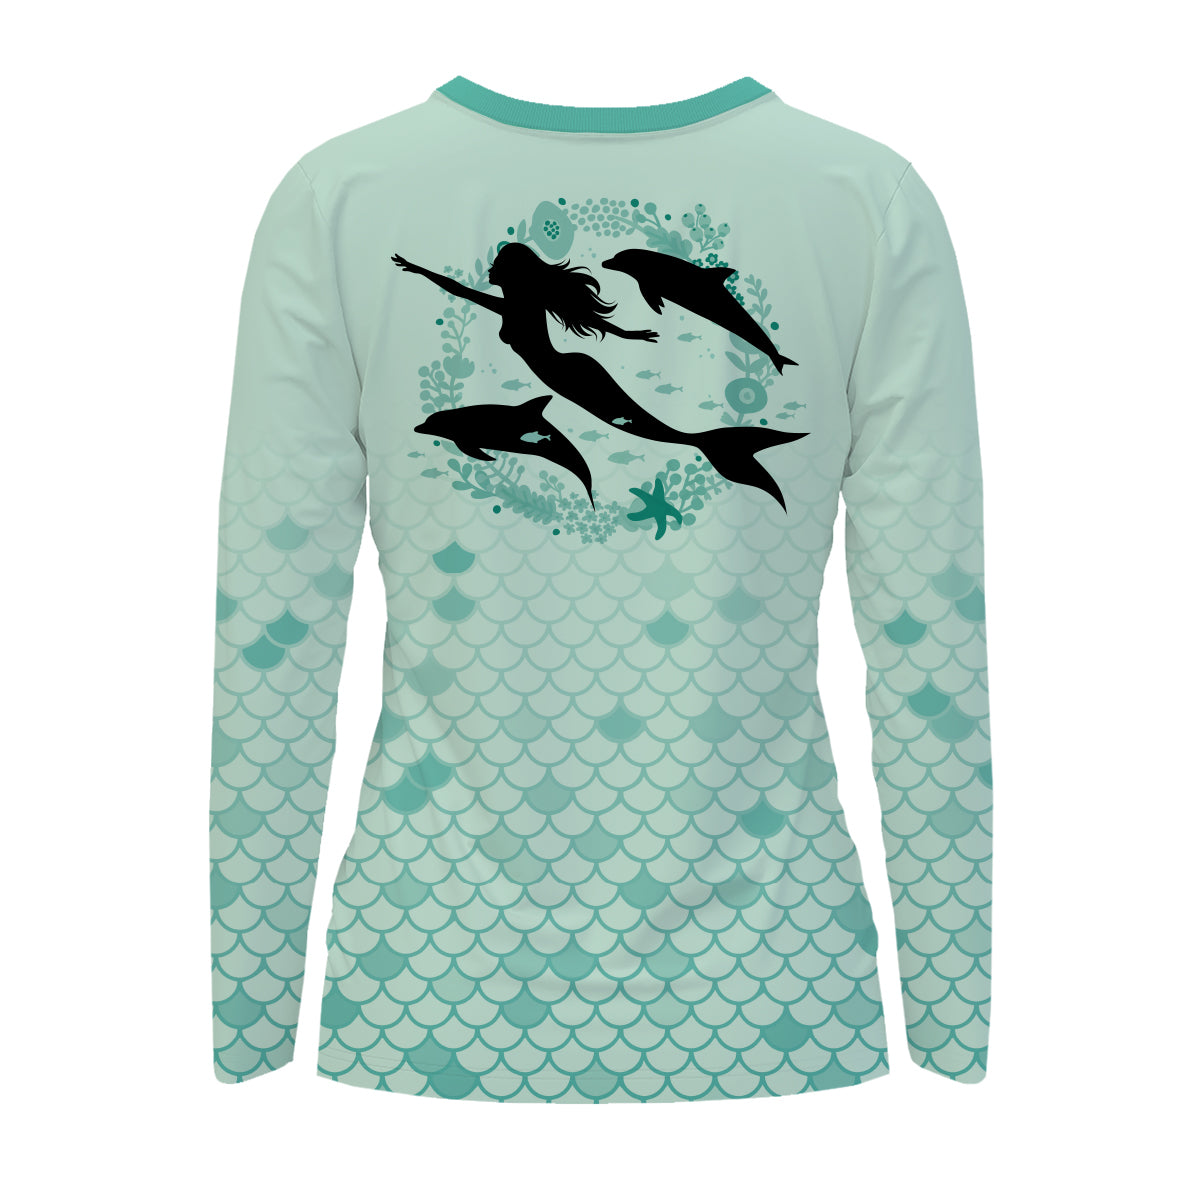 Women's Mermaid & Dolphins Performance Long Sleeve Shirt with Mermaid –  Tops & Tails Boutique